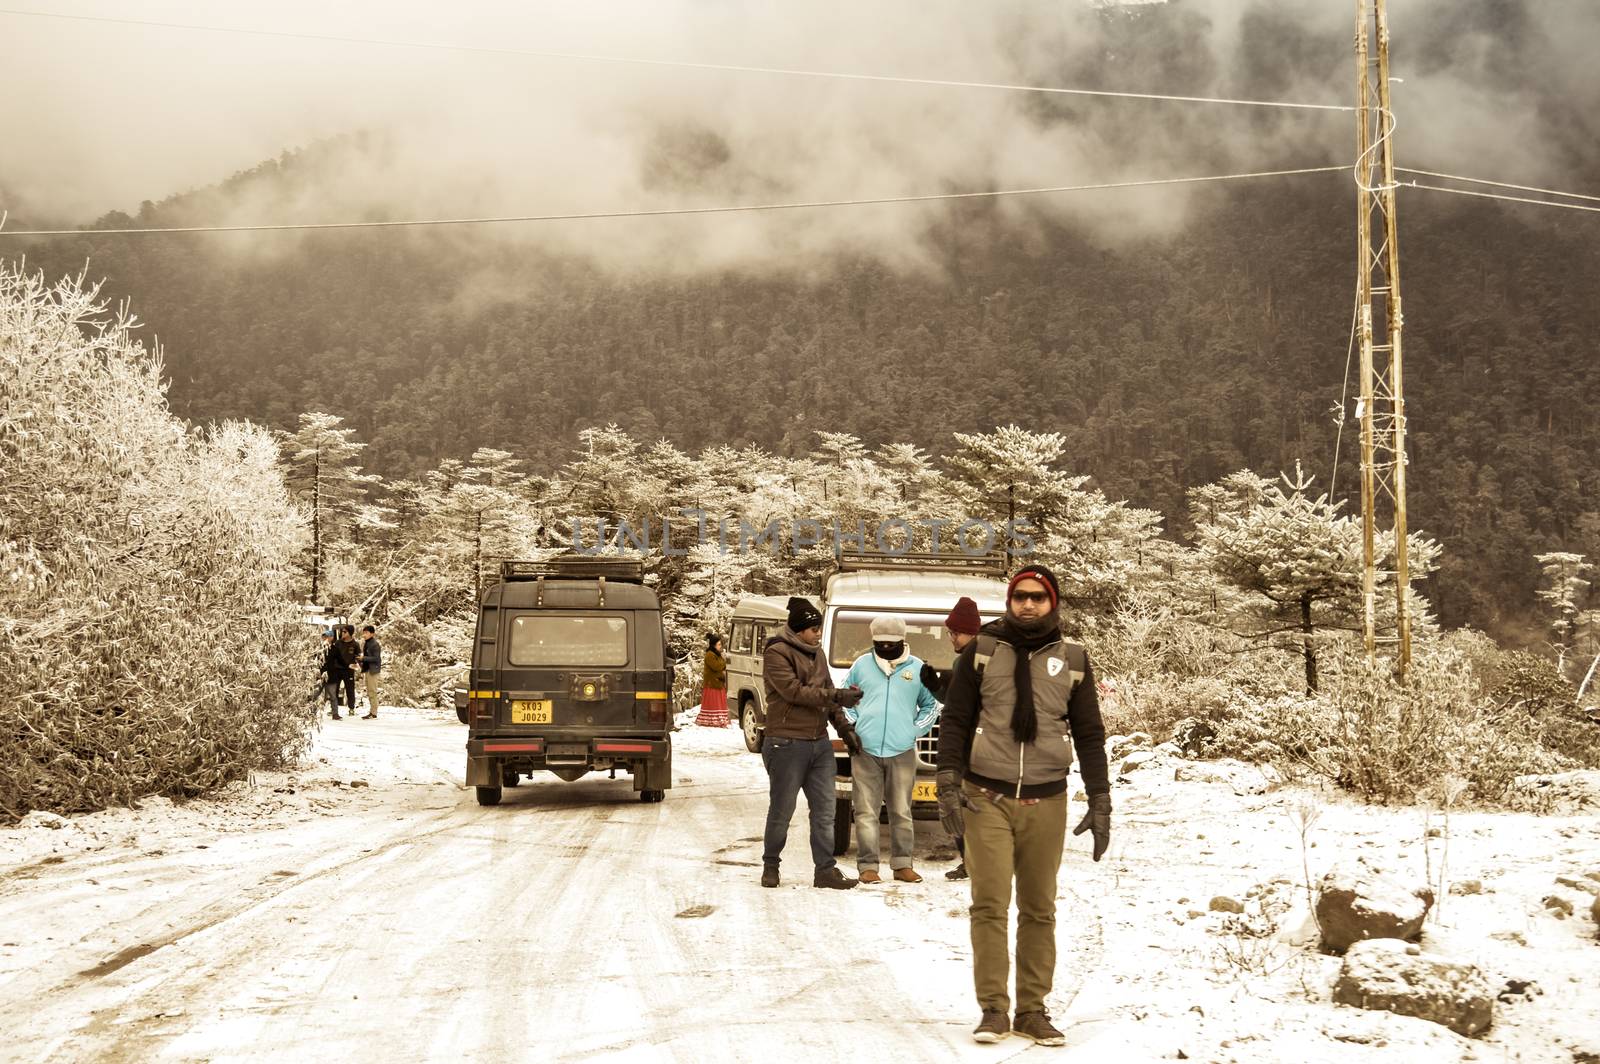 Shimla, Himachal Pradesh, December 25, 2018: Incessant snowfall has prompted tourist to temporarily halt. Nearby places Summer Hills, Jakhoo, Chadwick Falls, Kufri, Mall Road blocked due to snowfall.